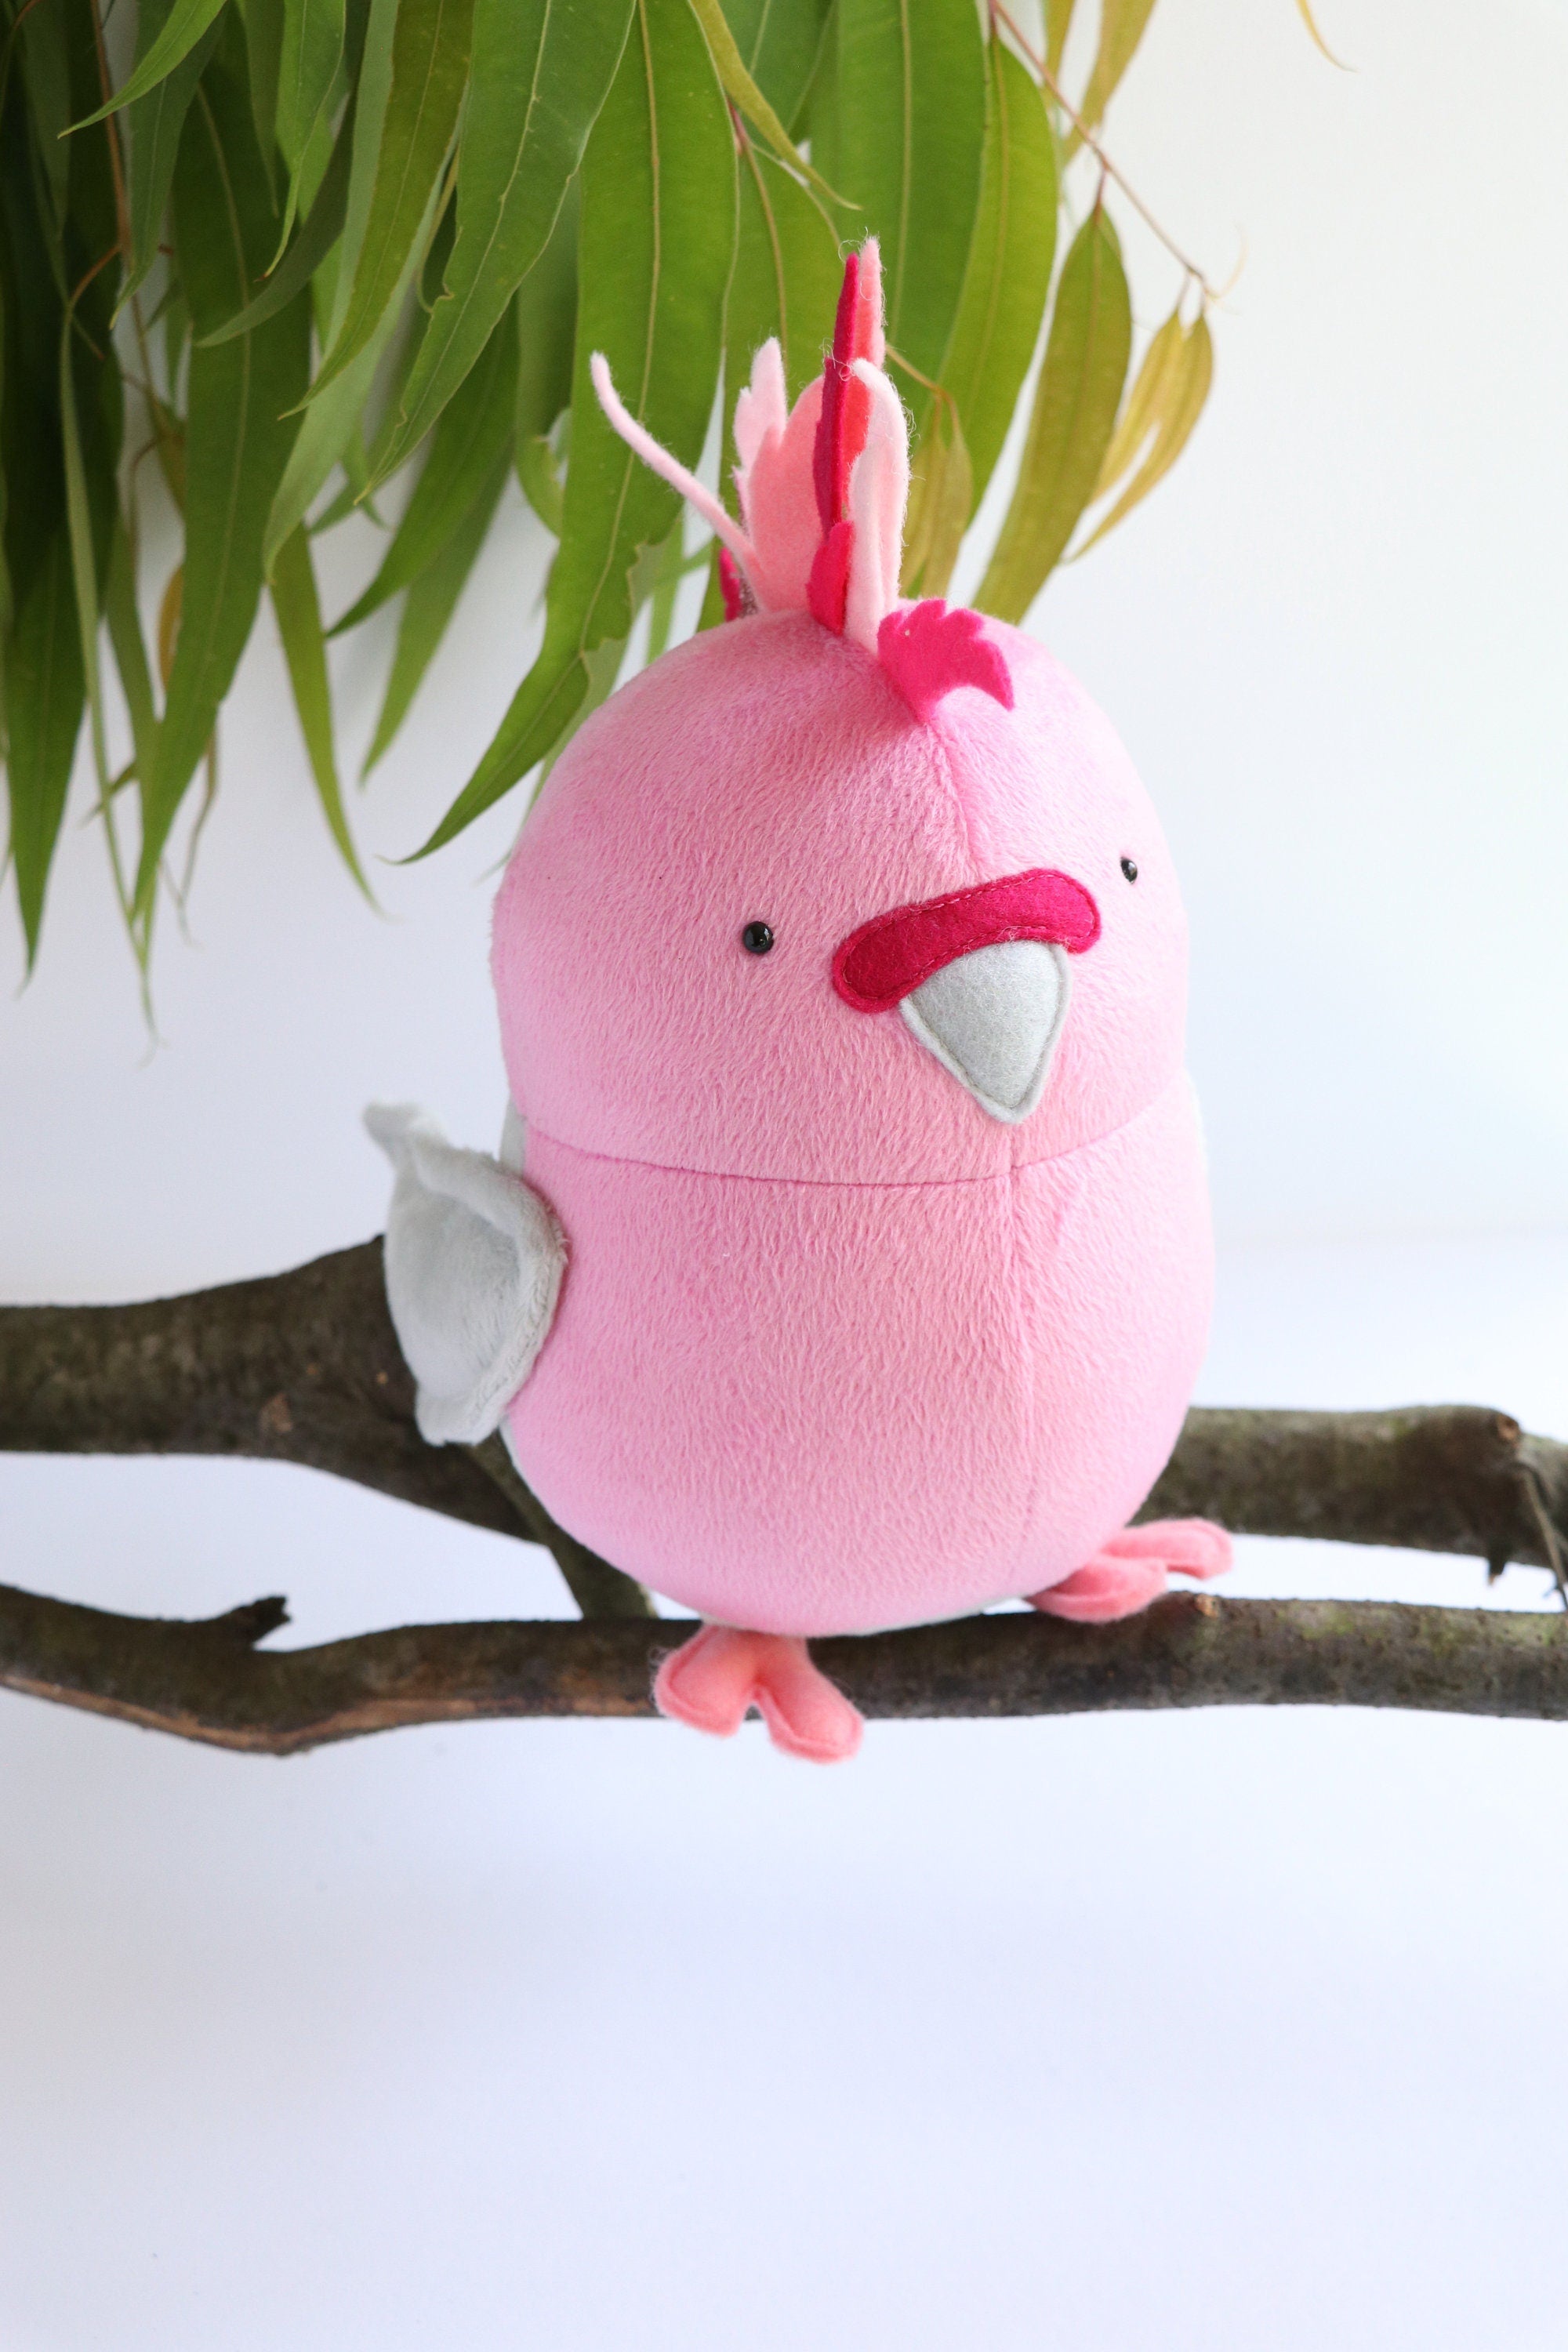 Flock: Cockatoo, Budgie, Galah sewing pattern and more